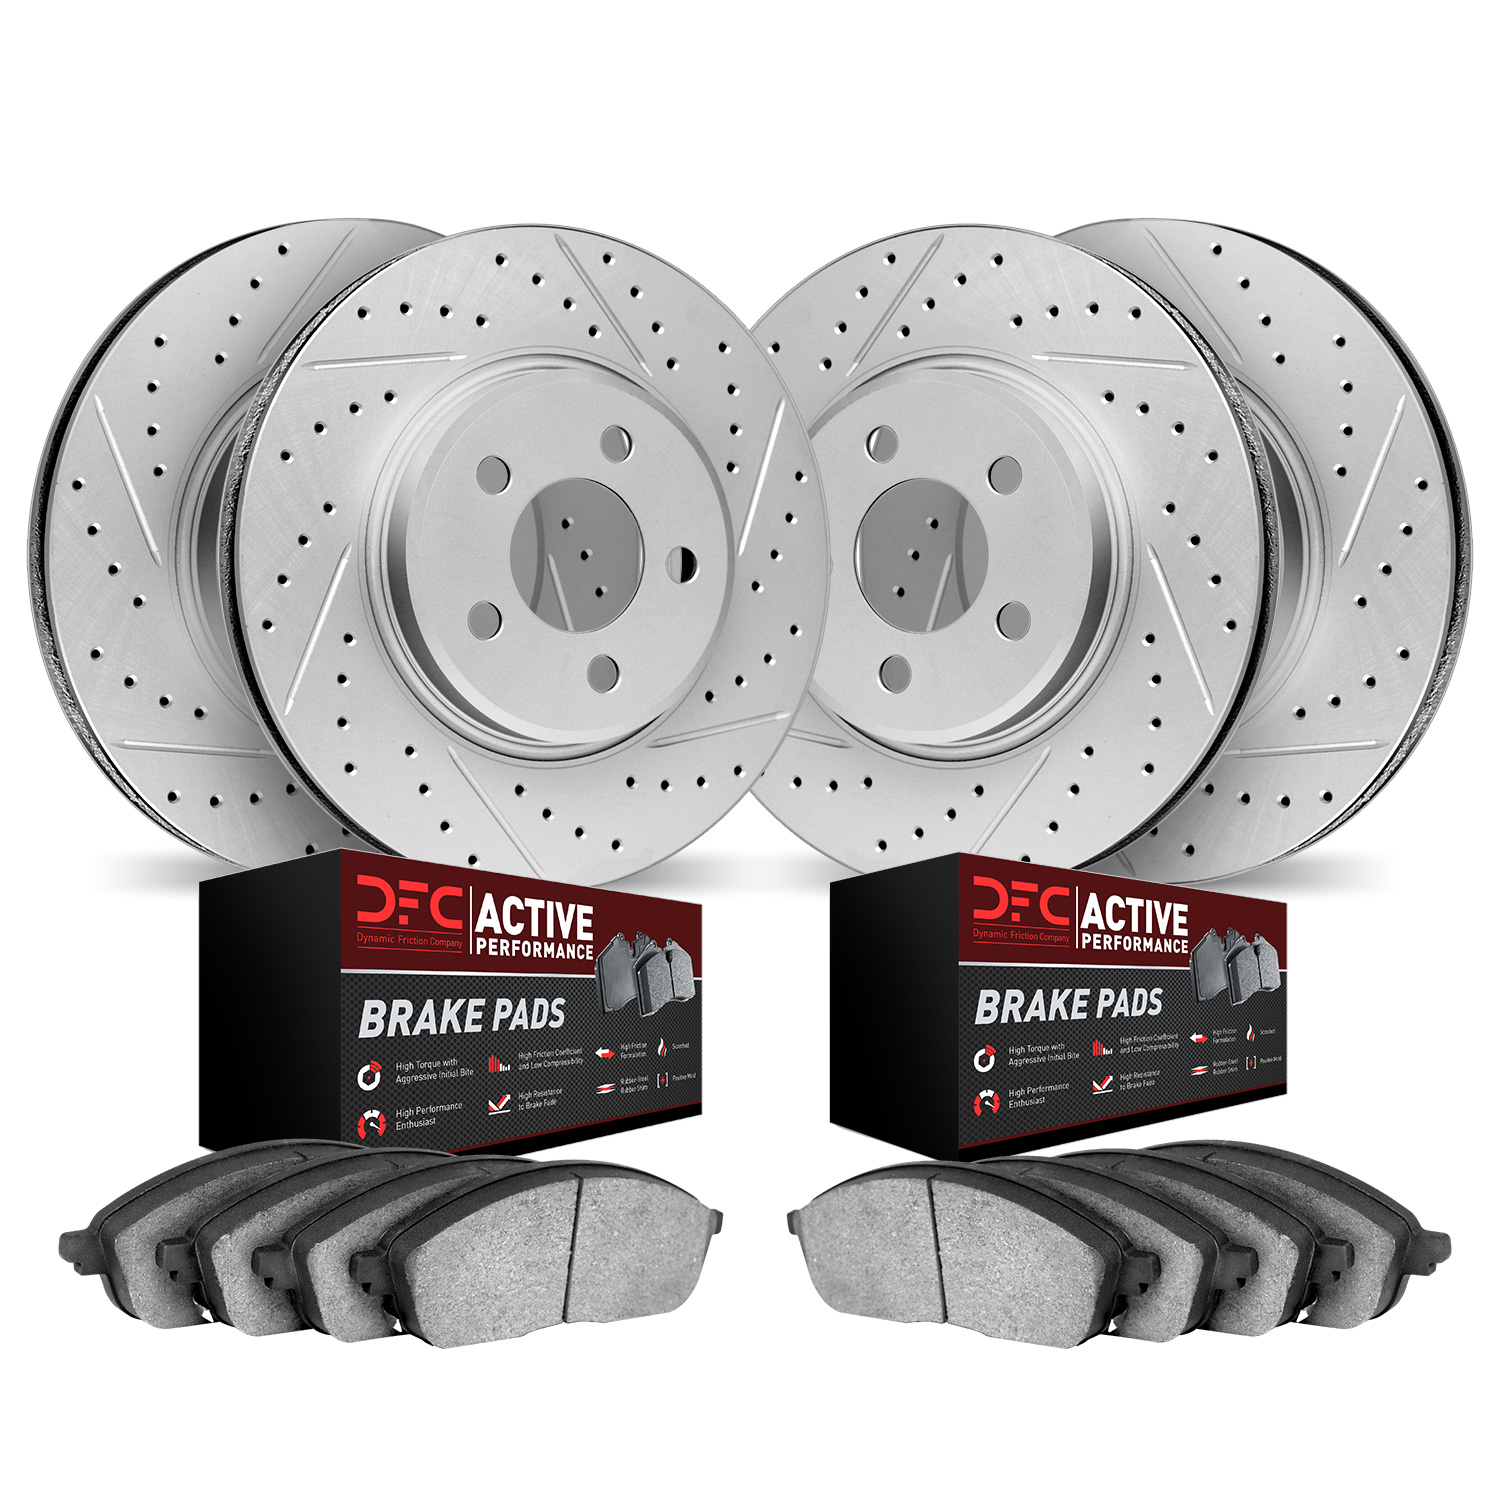 2704-31048 Geoperformance Drilled/Slotted Brake Rotors with Active Performance Pads Kit, 2001-2005 BMW, Position: Front and Rear